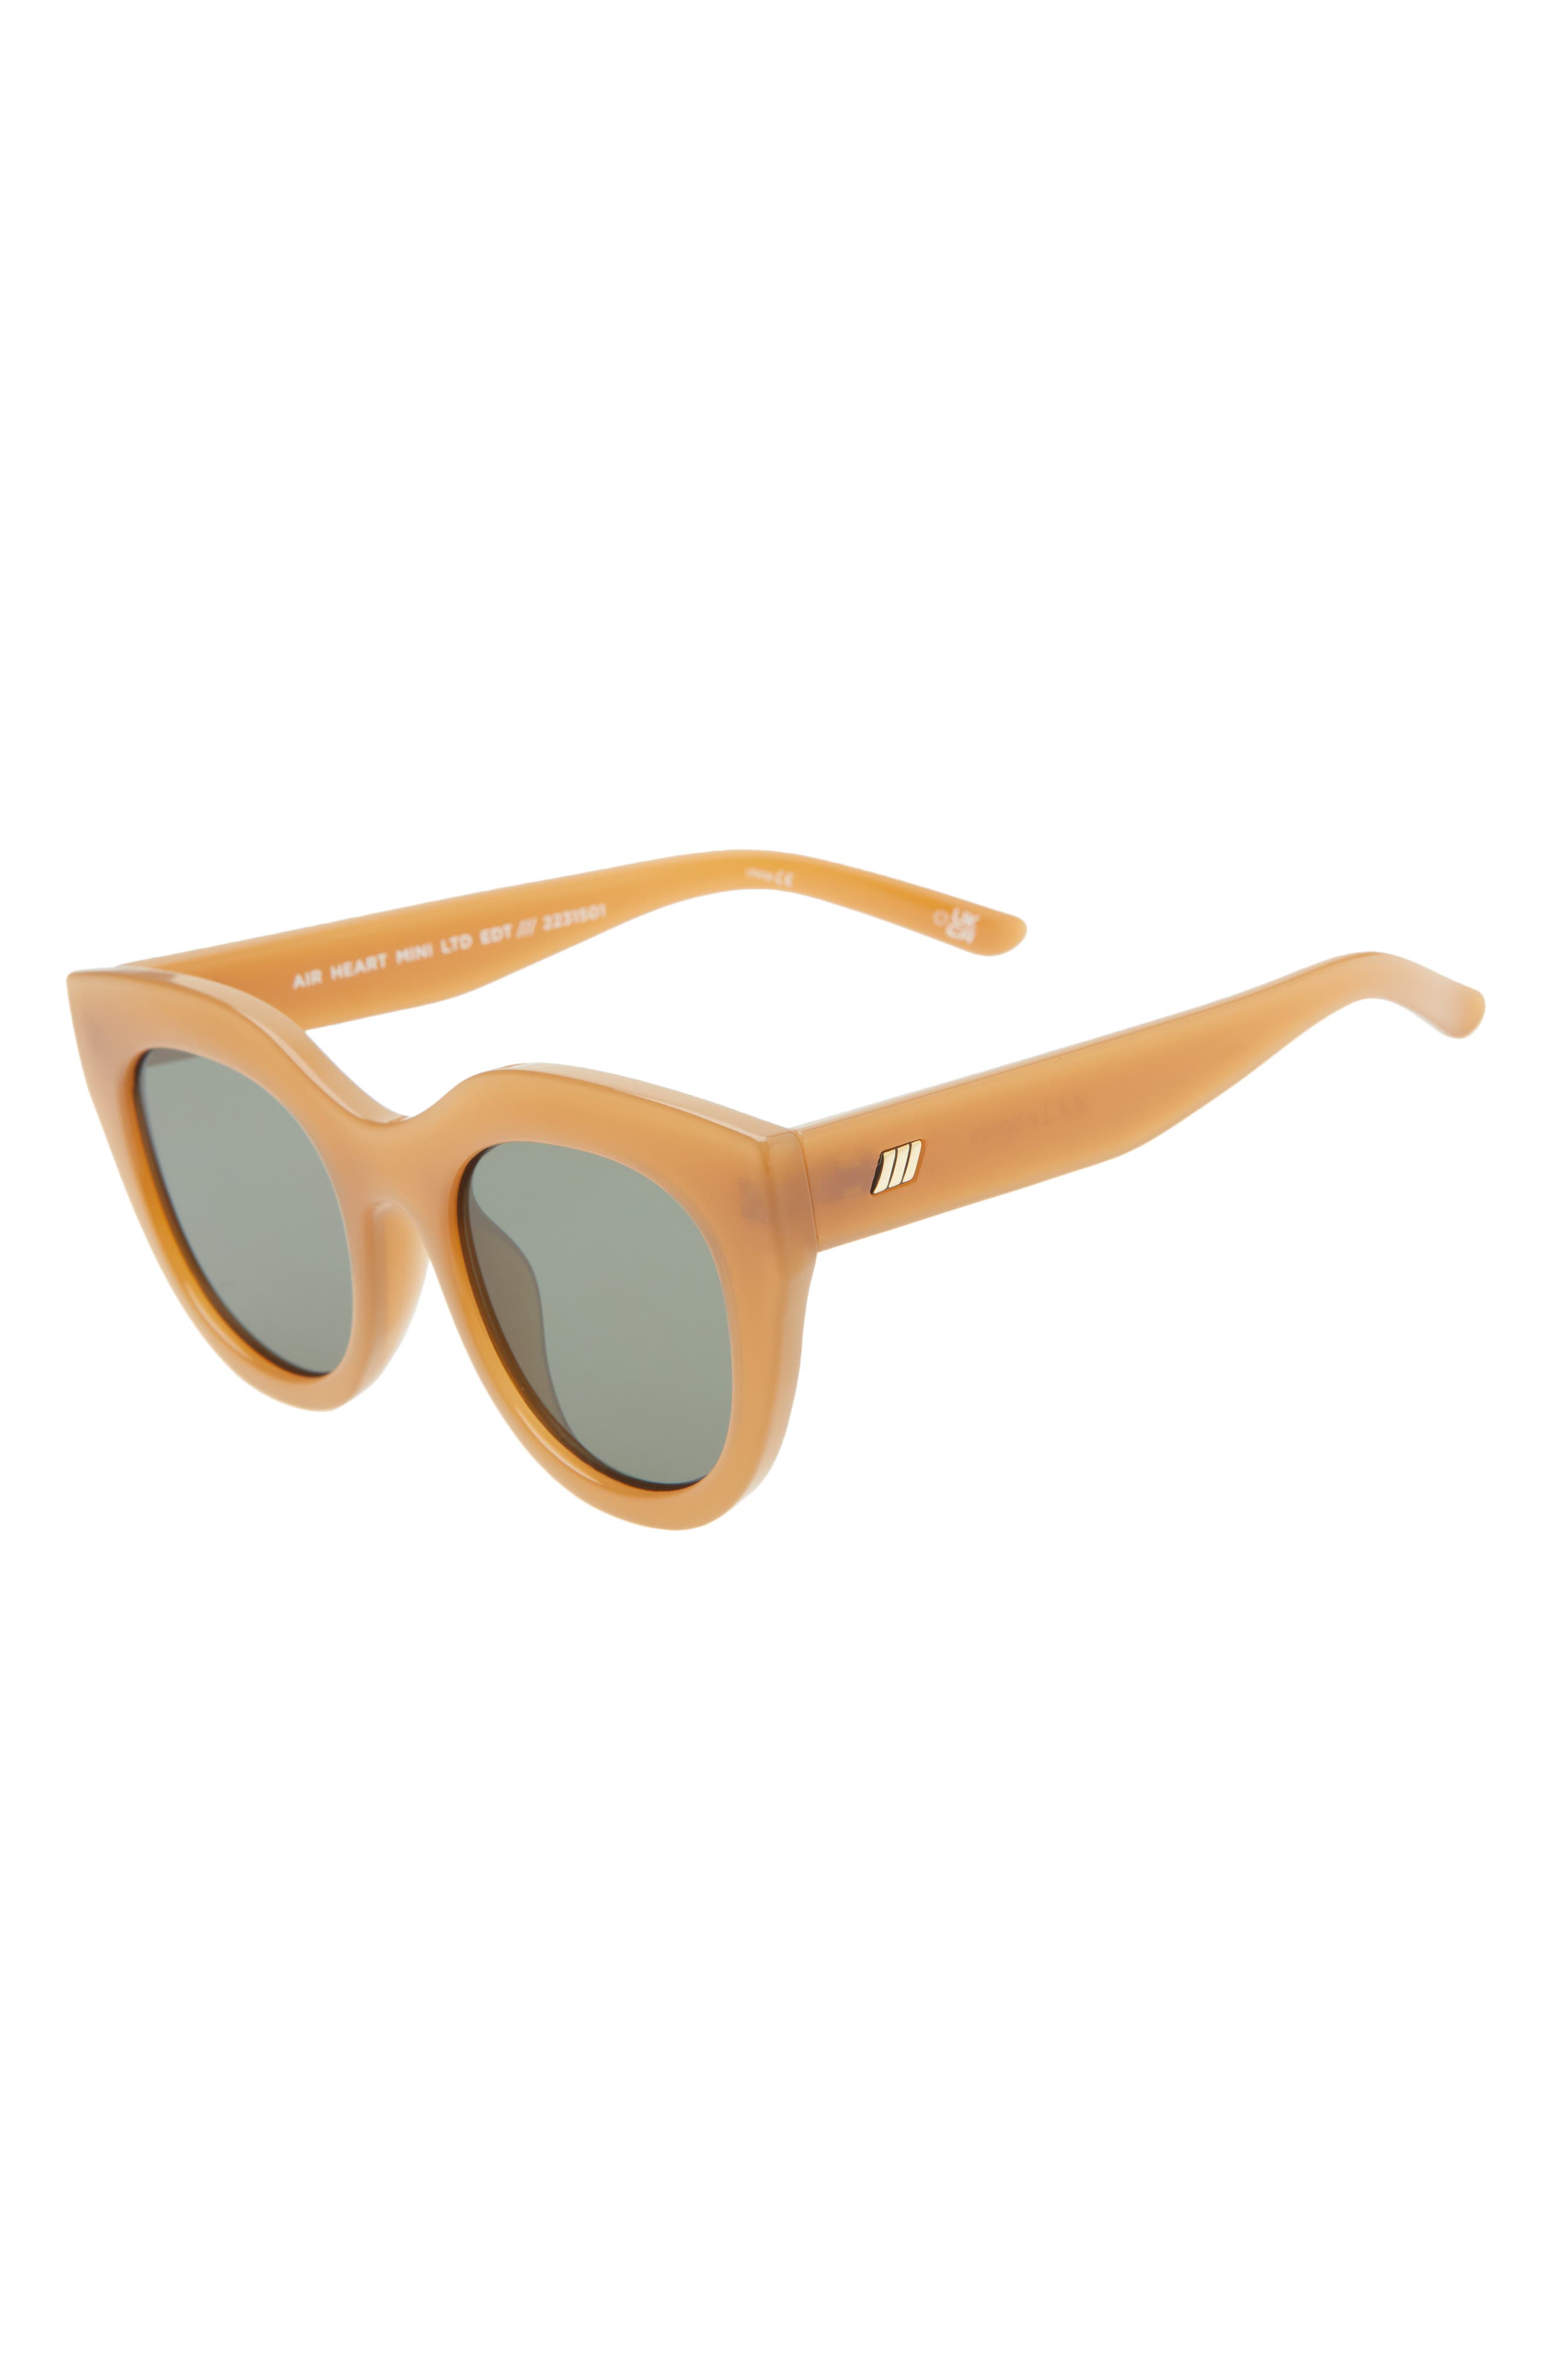 Le Specs Air Heart 45mm Cat Eye Sunglasses in Caramel at Nordstrom